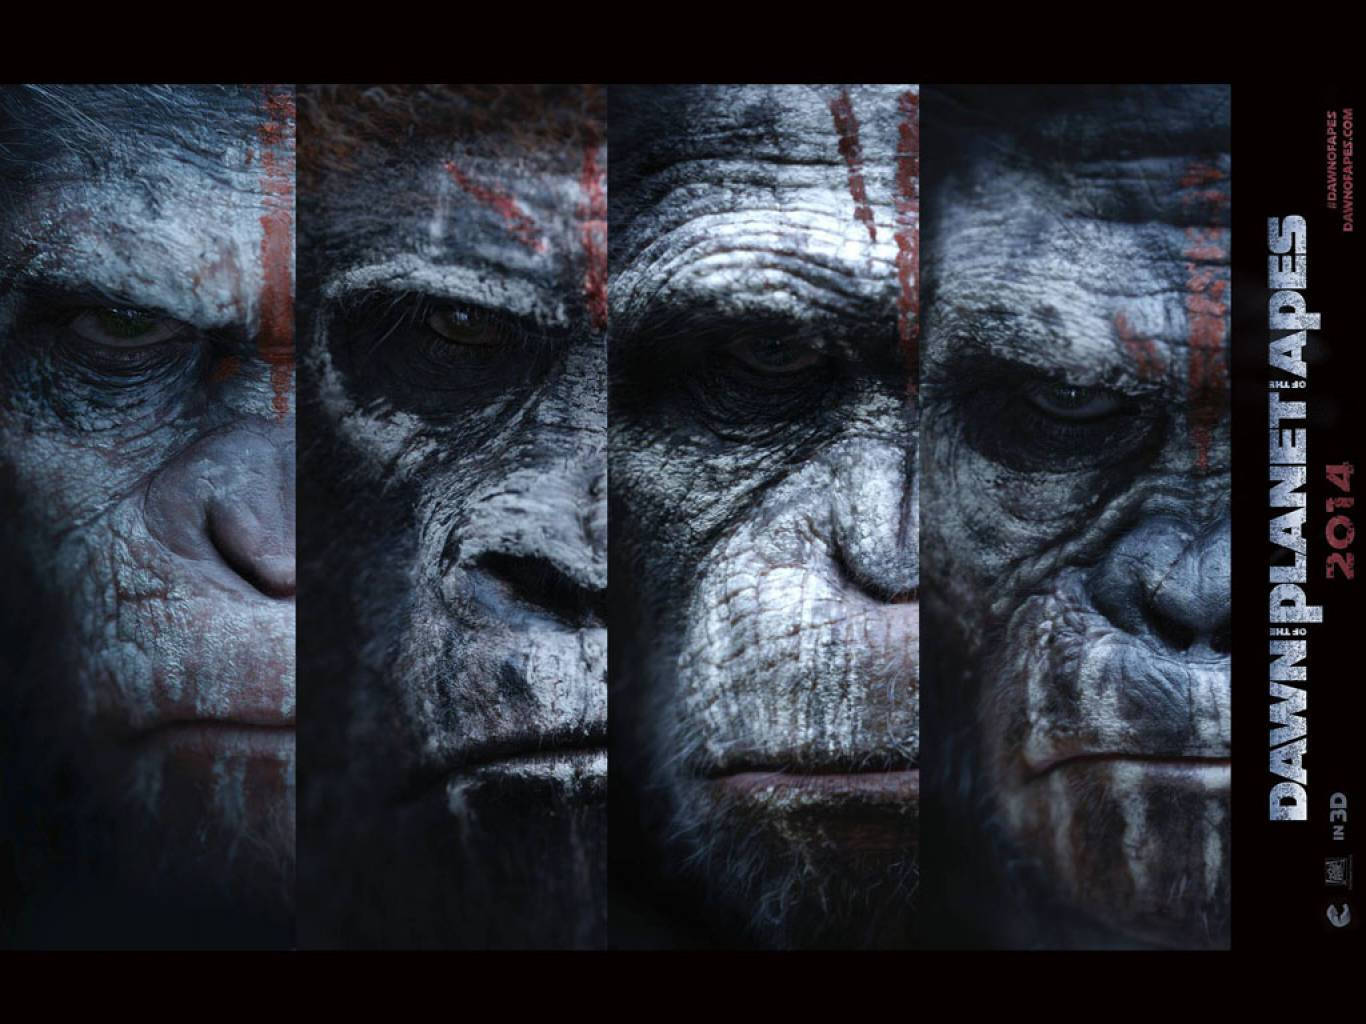 Planet Of The Apes Trilogy Poster Wallpaper